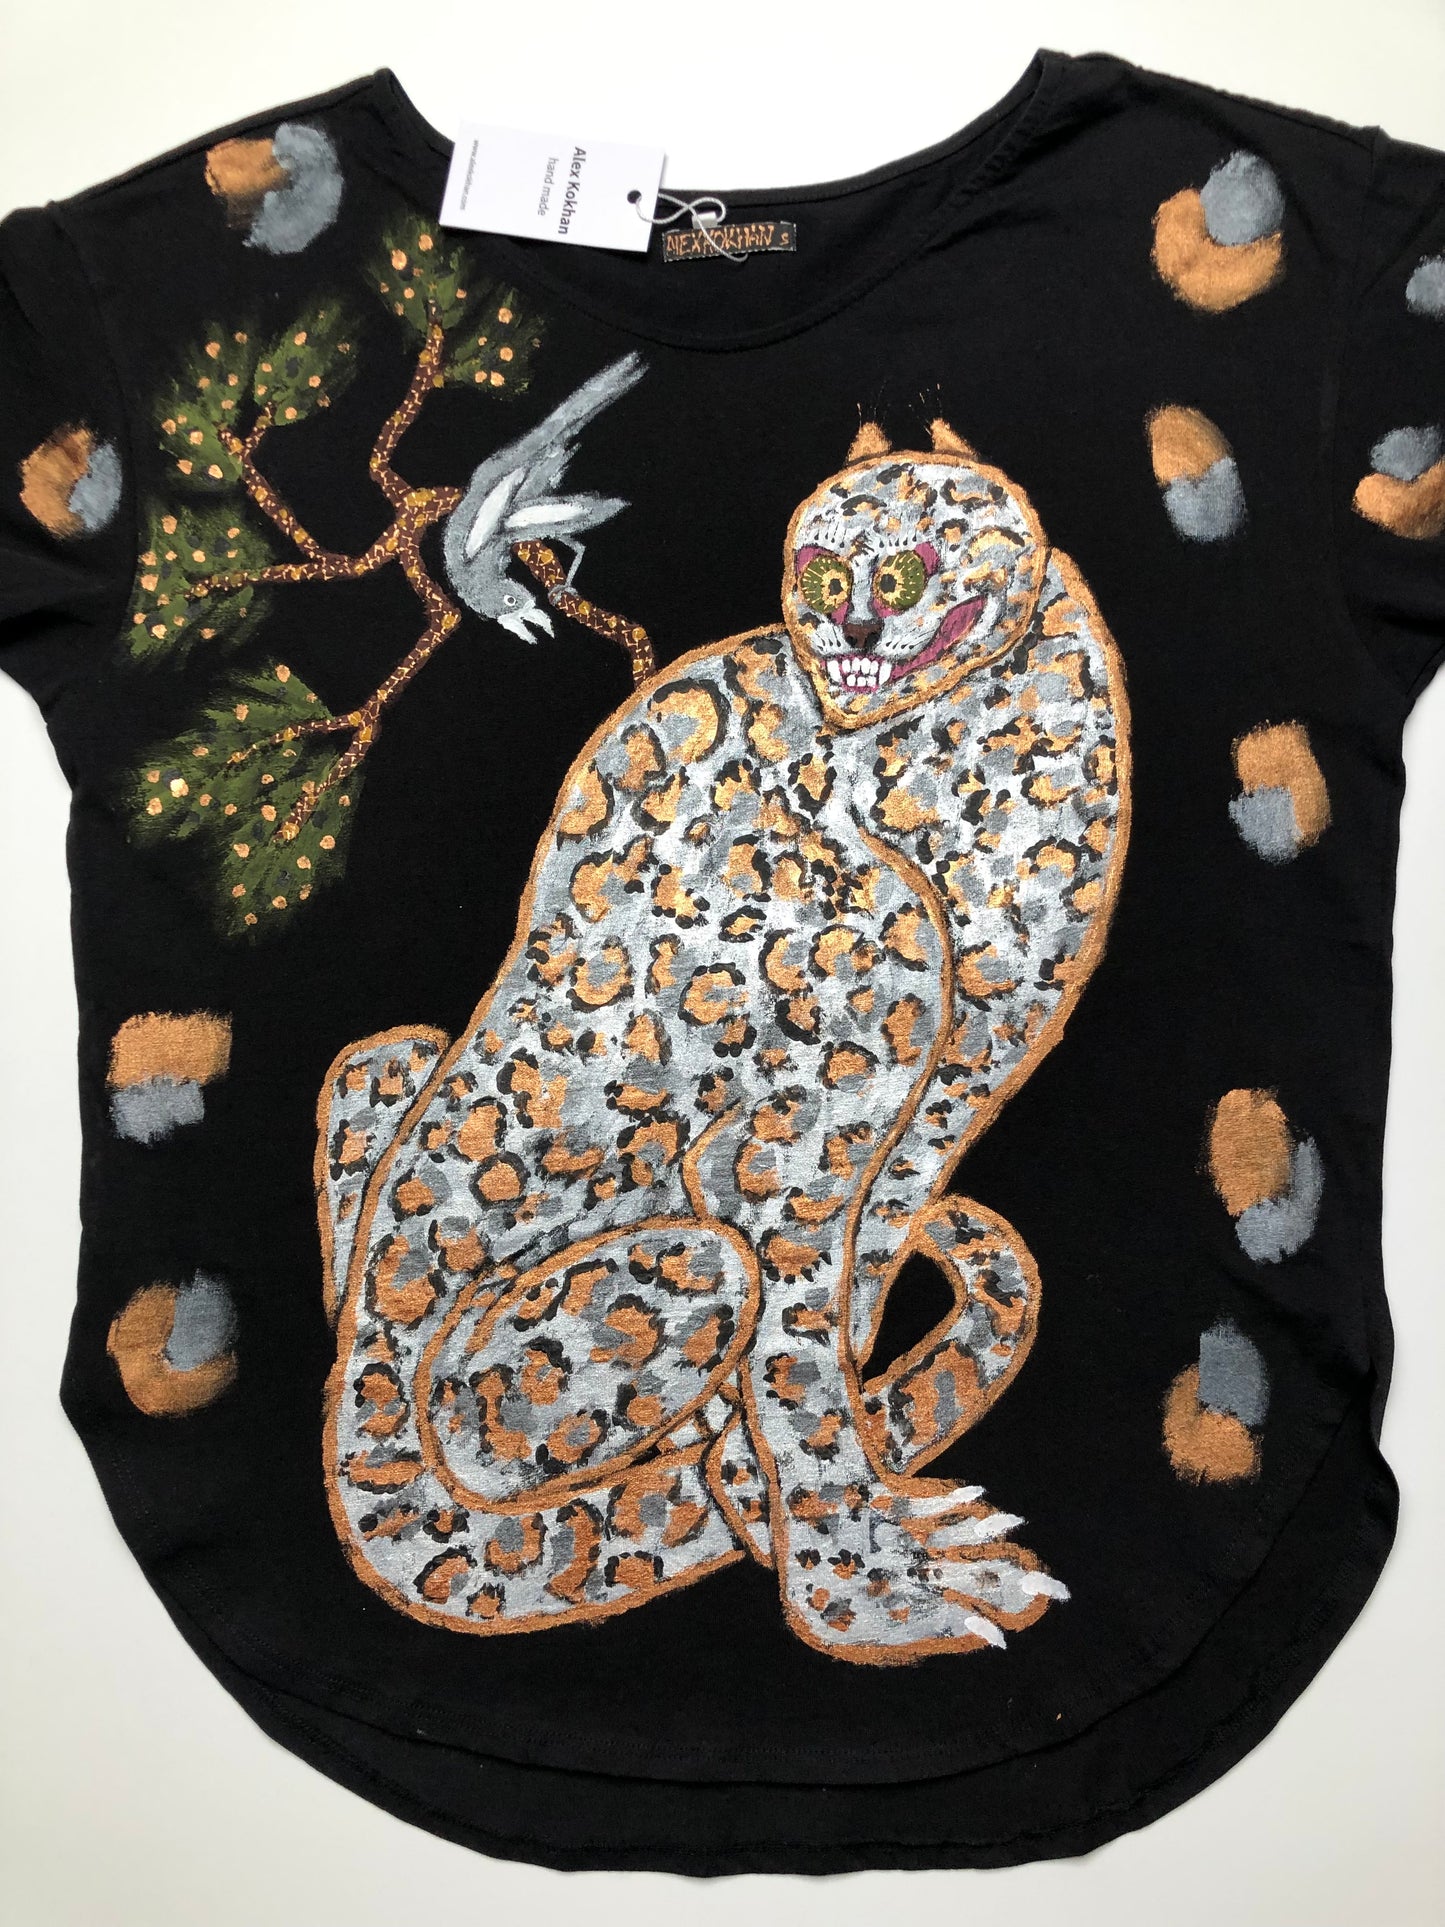 The front side of a handmade black women's T-shirt with a leopard and a bird on a tree